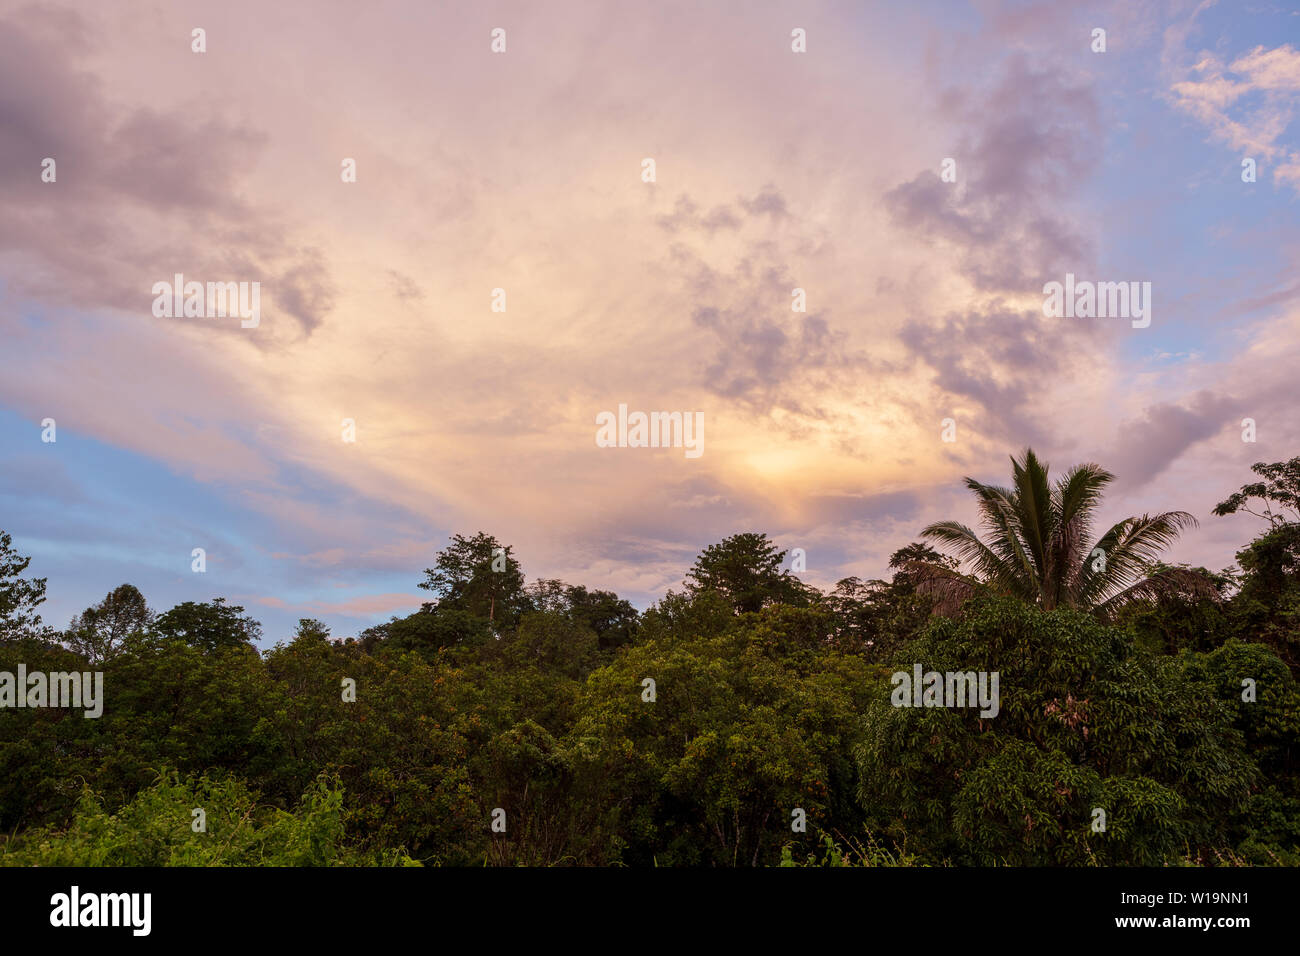 Tropical colorful vibrant sunset clouds and trees Stock Photo